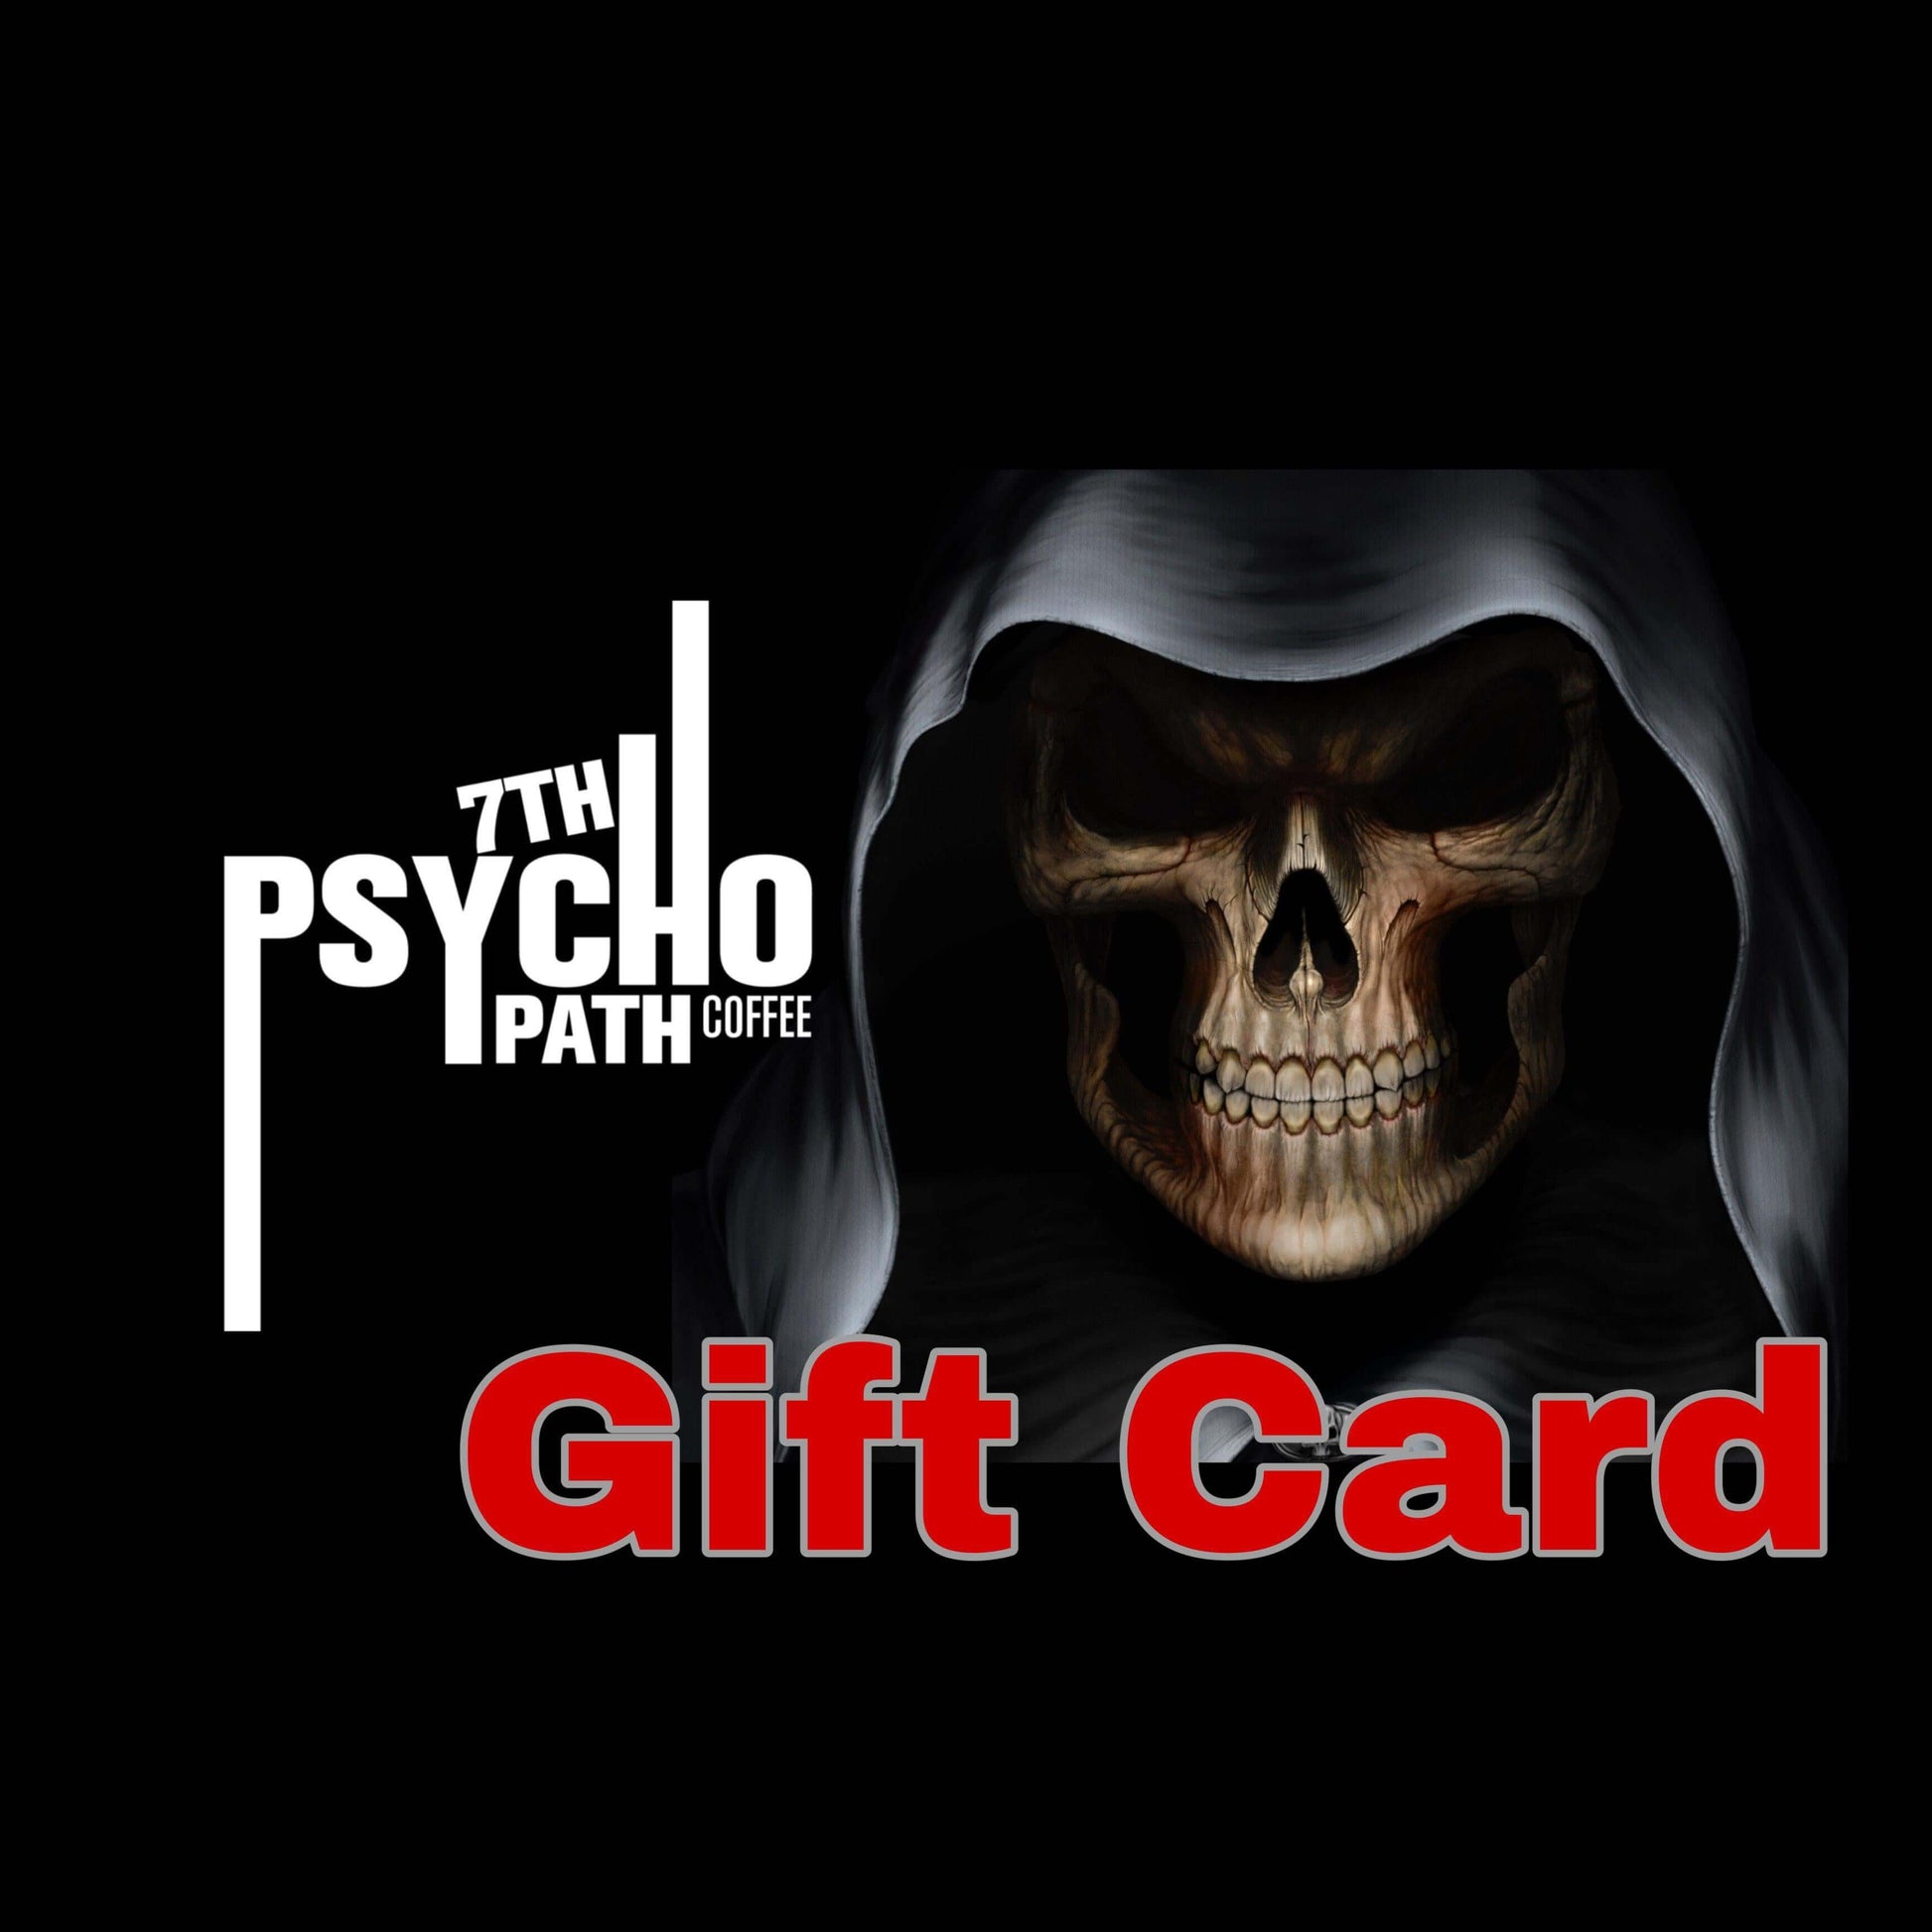  View details for 7th Psycho Gift Cards 7th Psycho Gift Cards